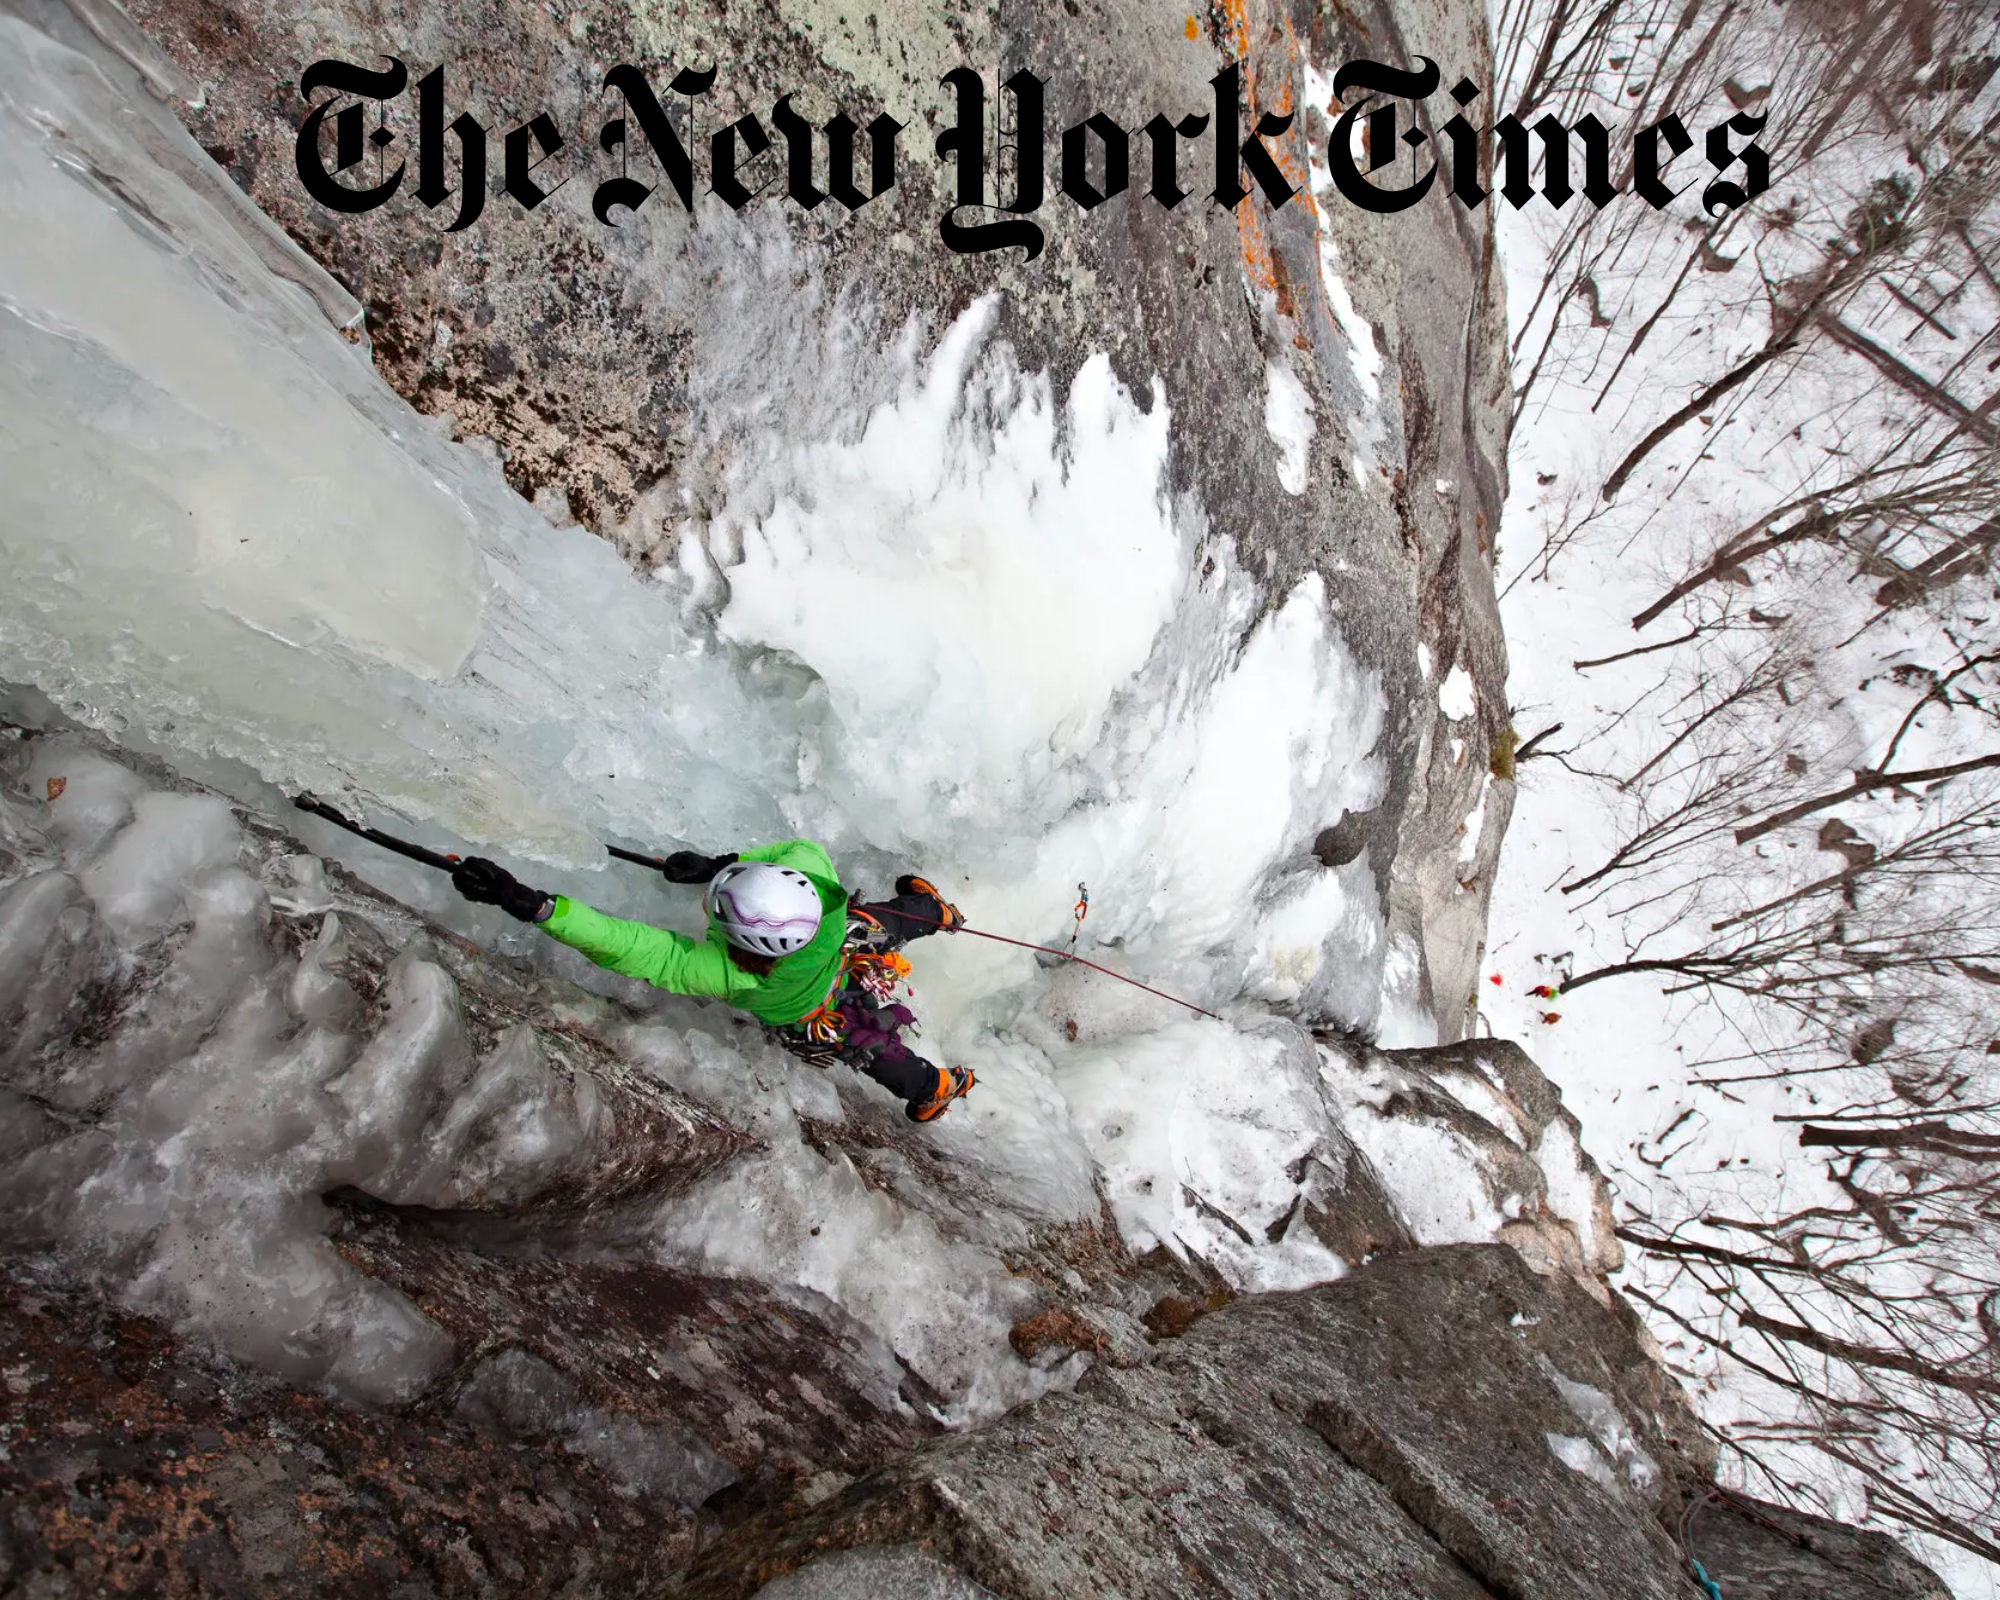 Ice Climbing Is Having It's Moment, but How Much Longer Will the Ice Be Around?